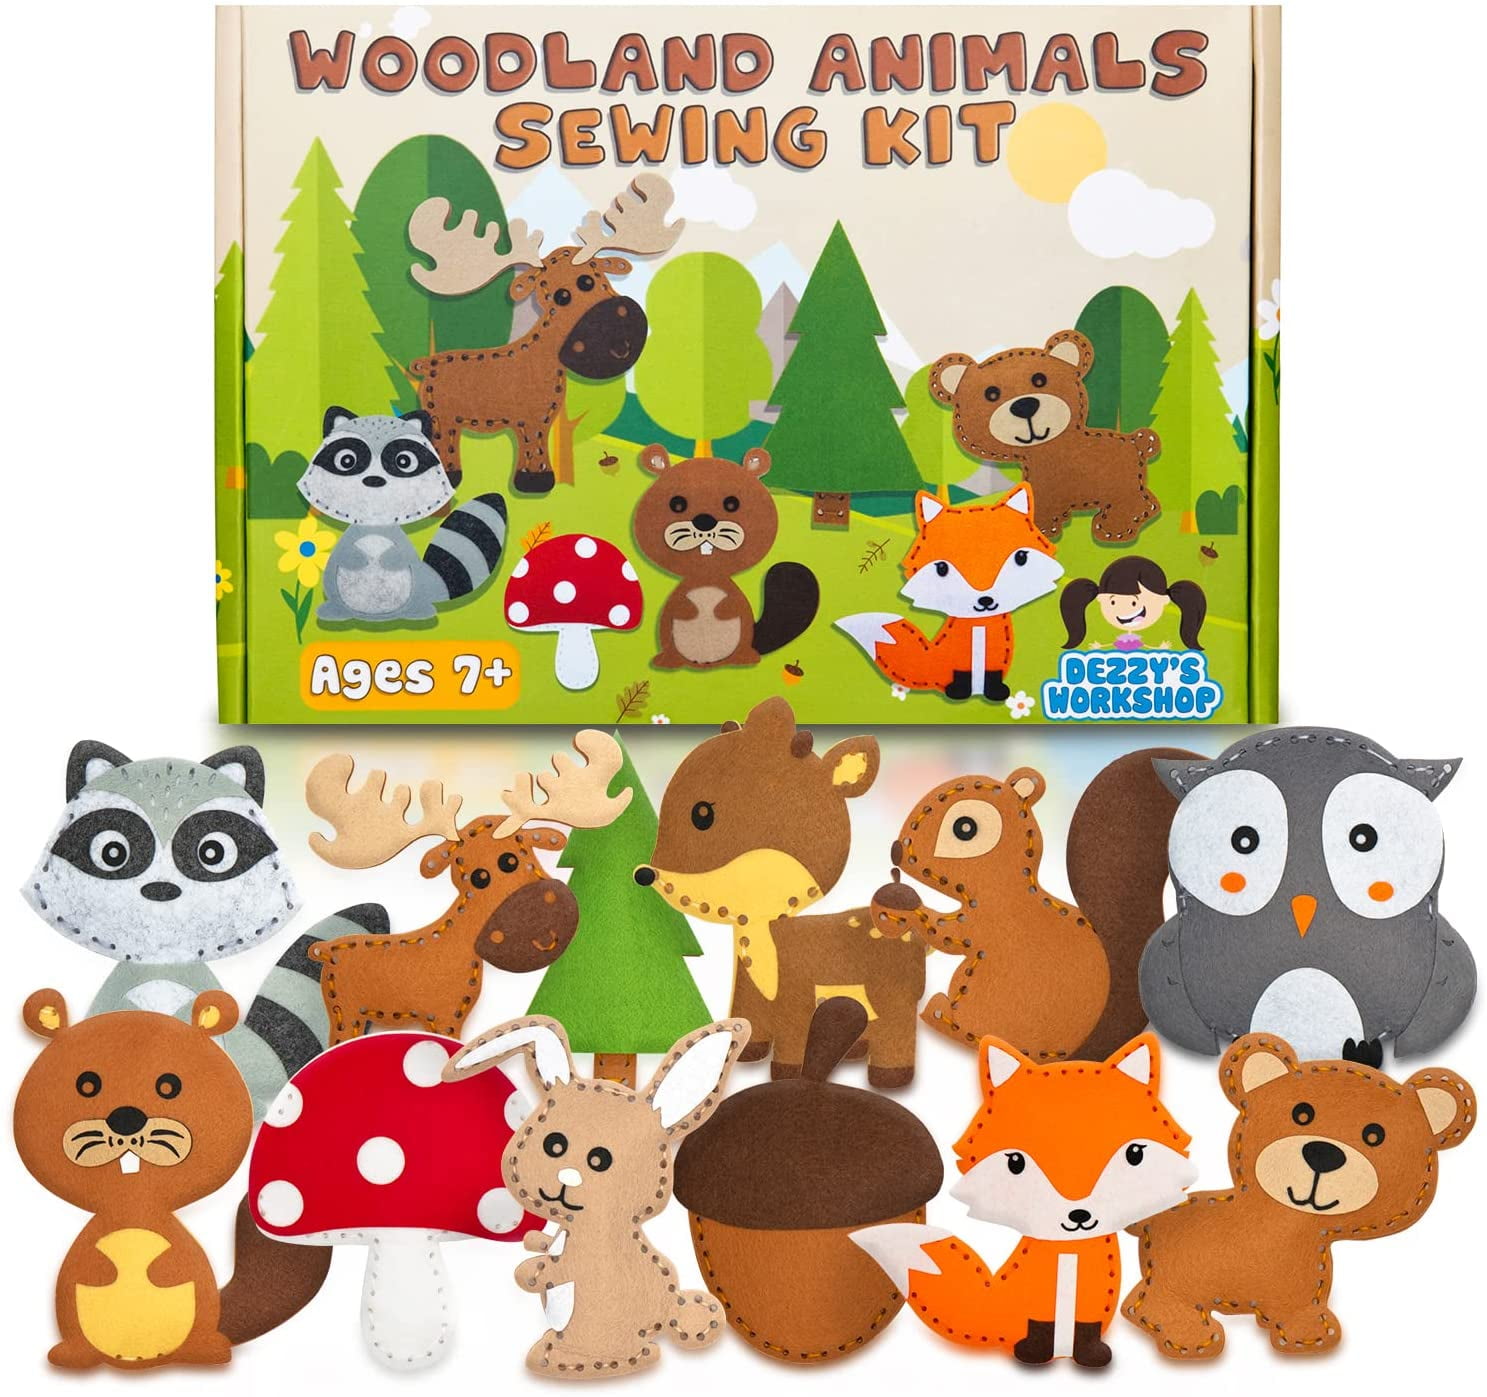 Dezzy's Workshop Sewing Kit for Kids - Woodland Animals Kids Sewing Kit -  Make Your Own Stuffed Animal Kit - Felt Stitch Art and Craft Toys for Boys